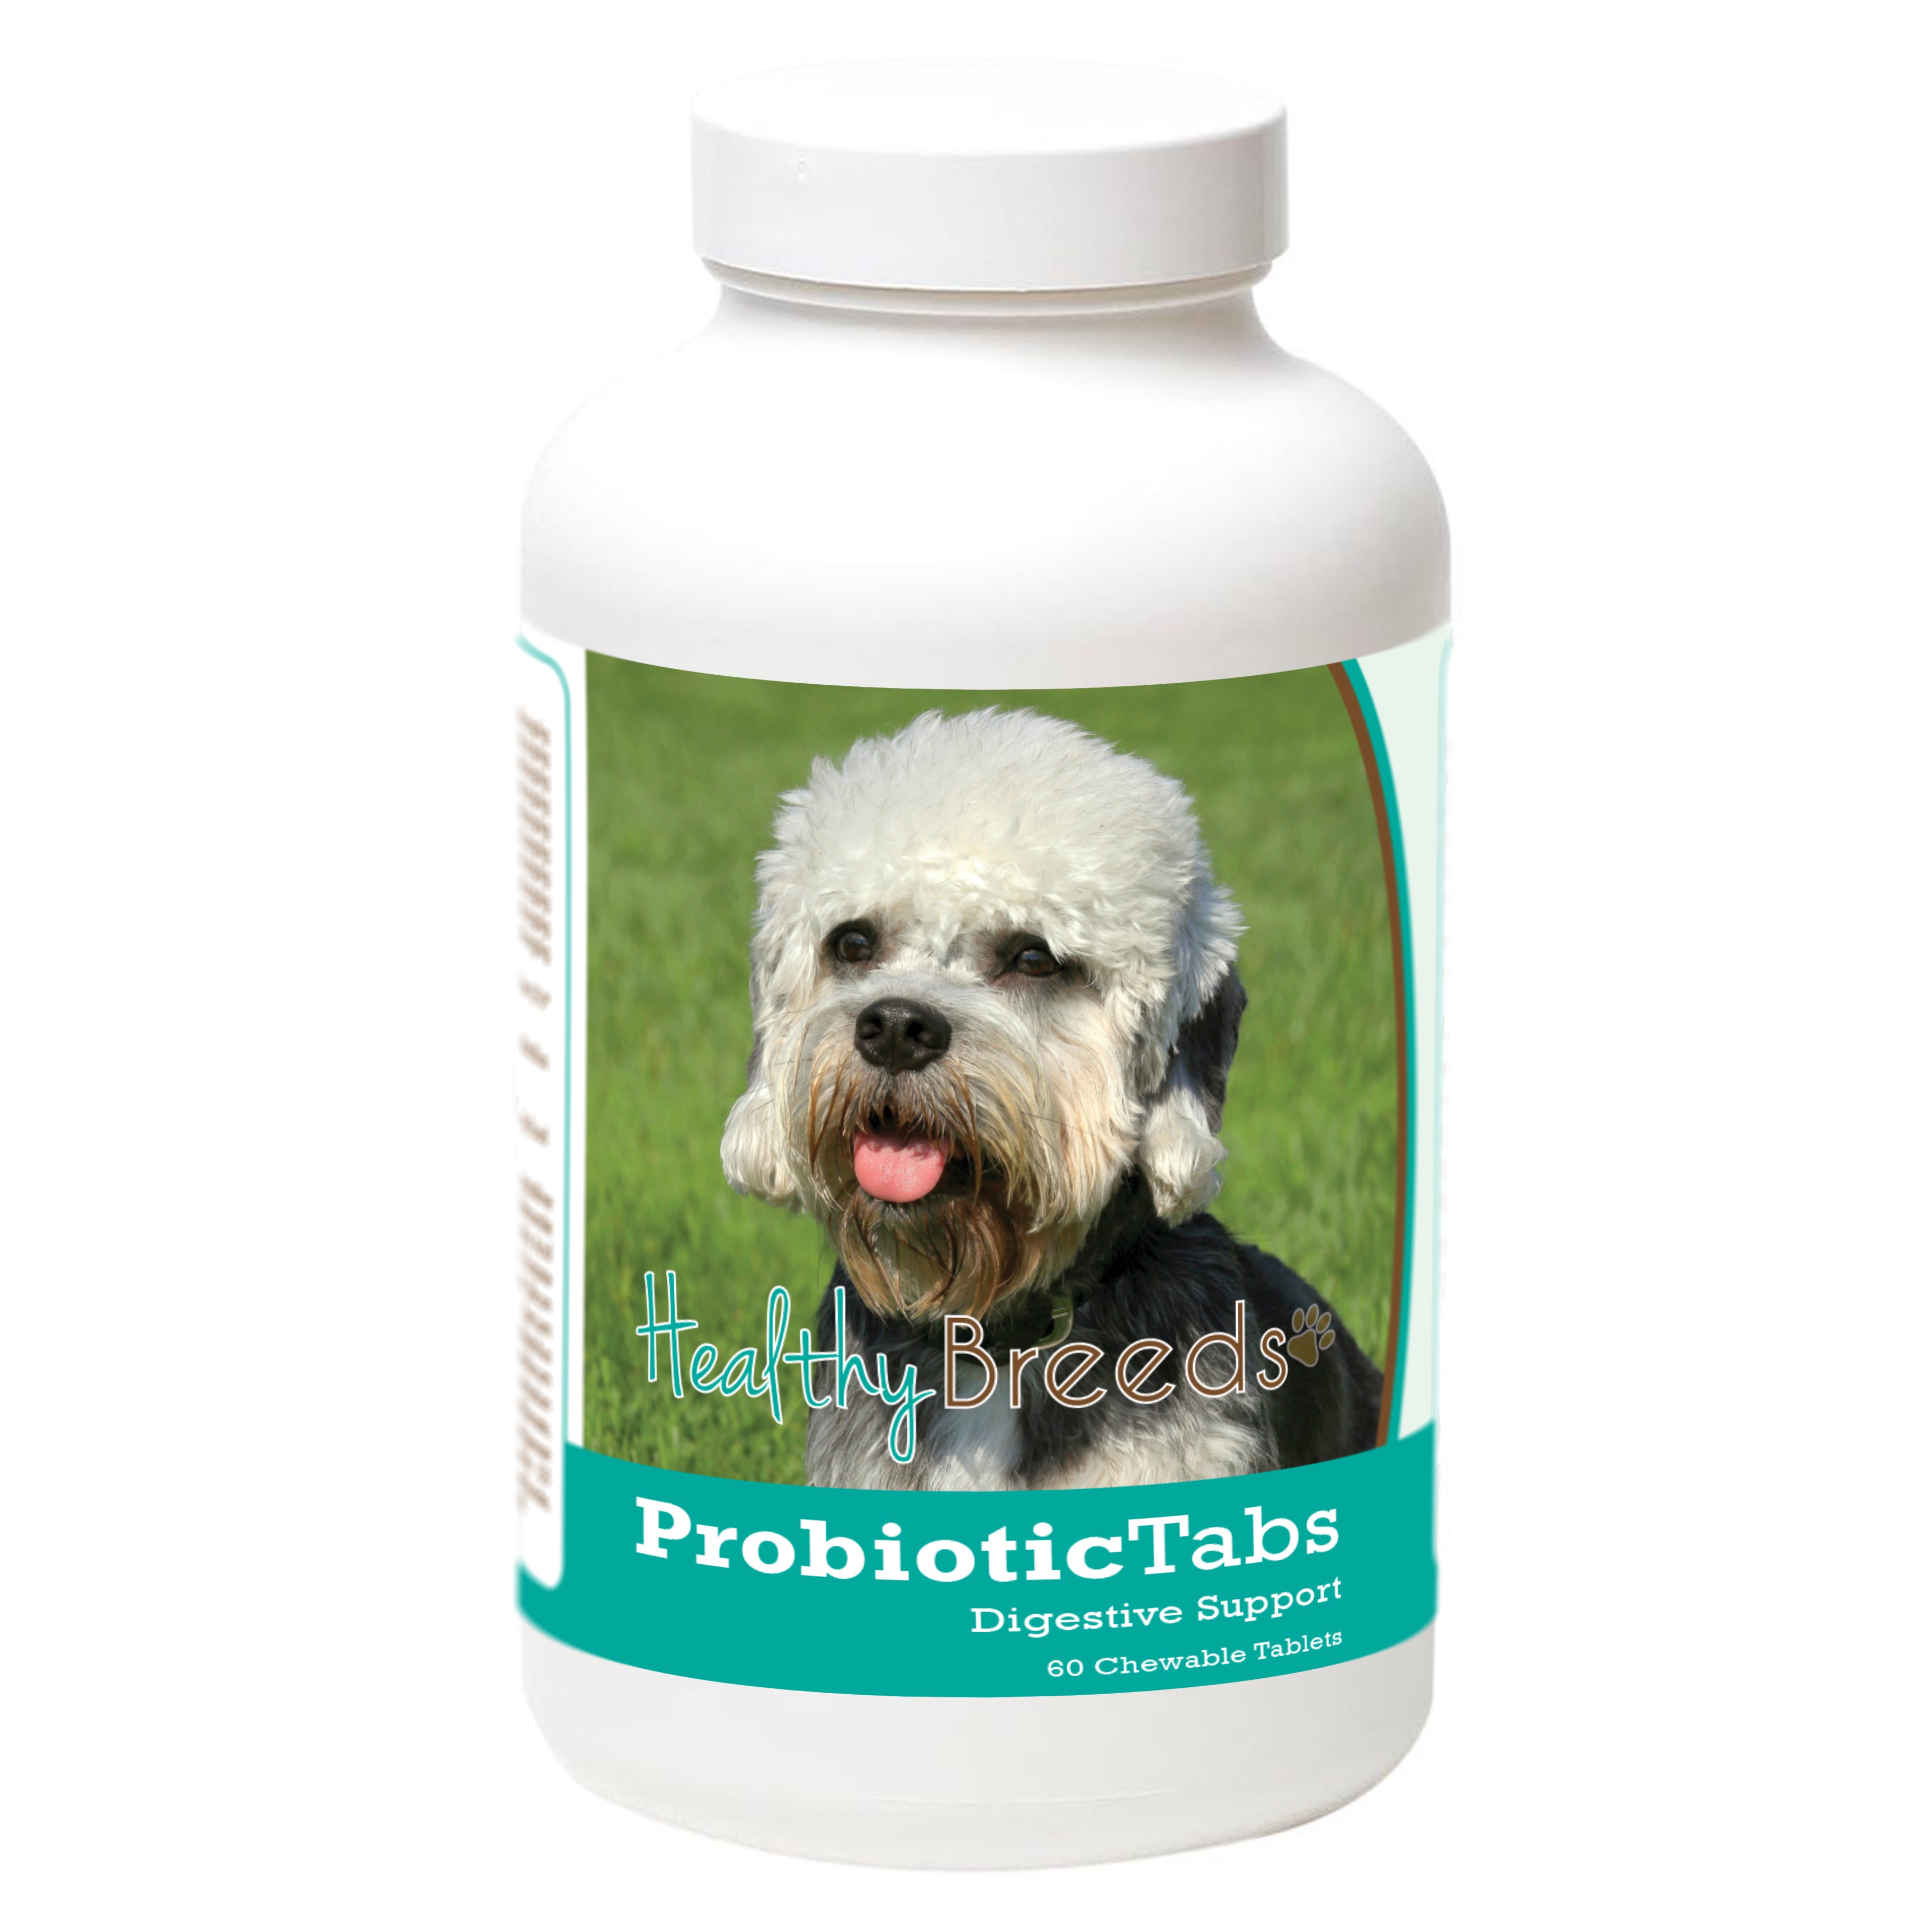 Dandie Dinmont Terrier Probiotic and Digestive Support for Dogs 60 Count